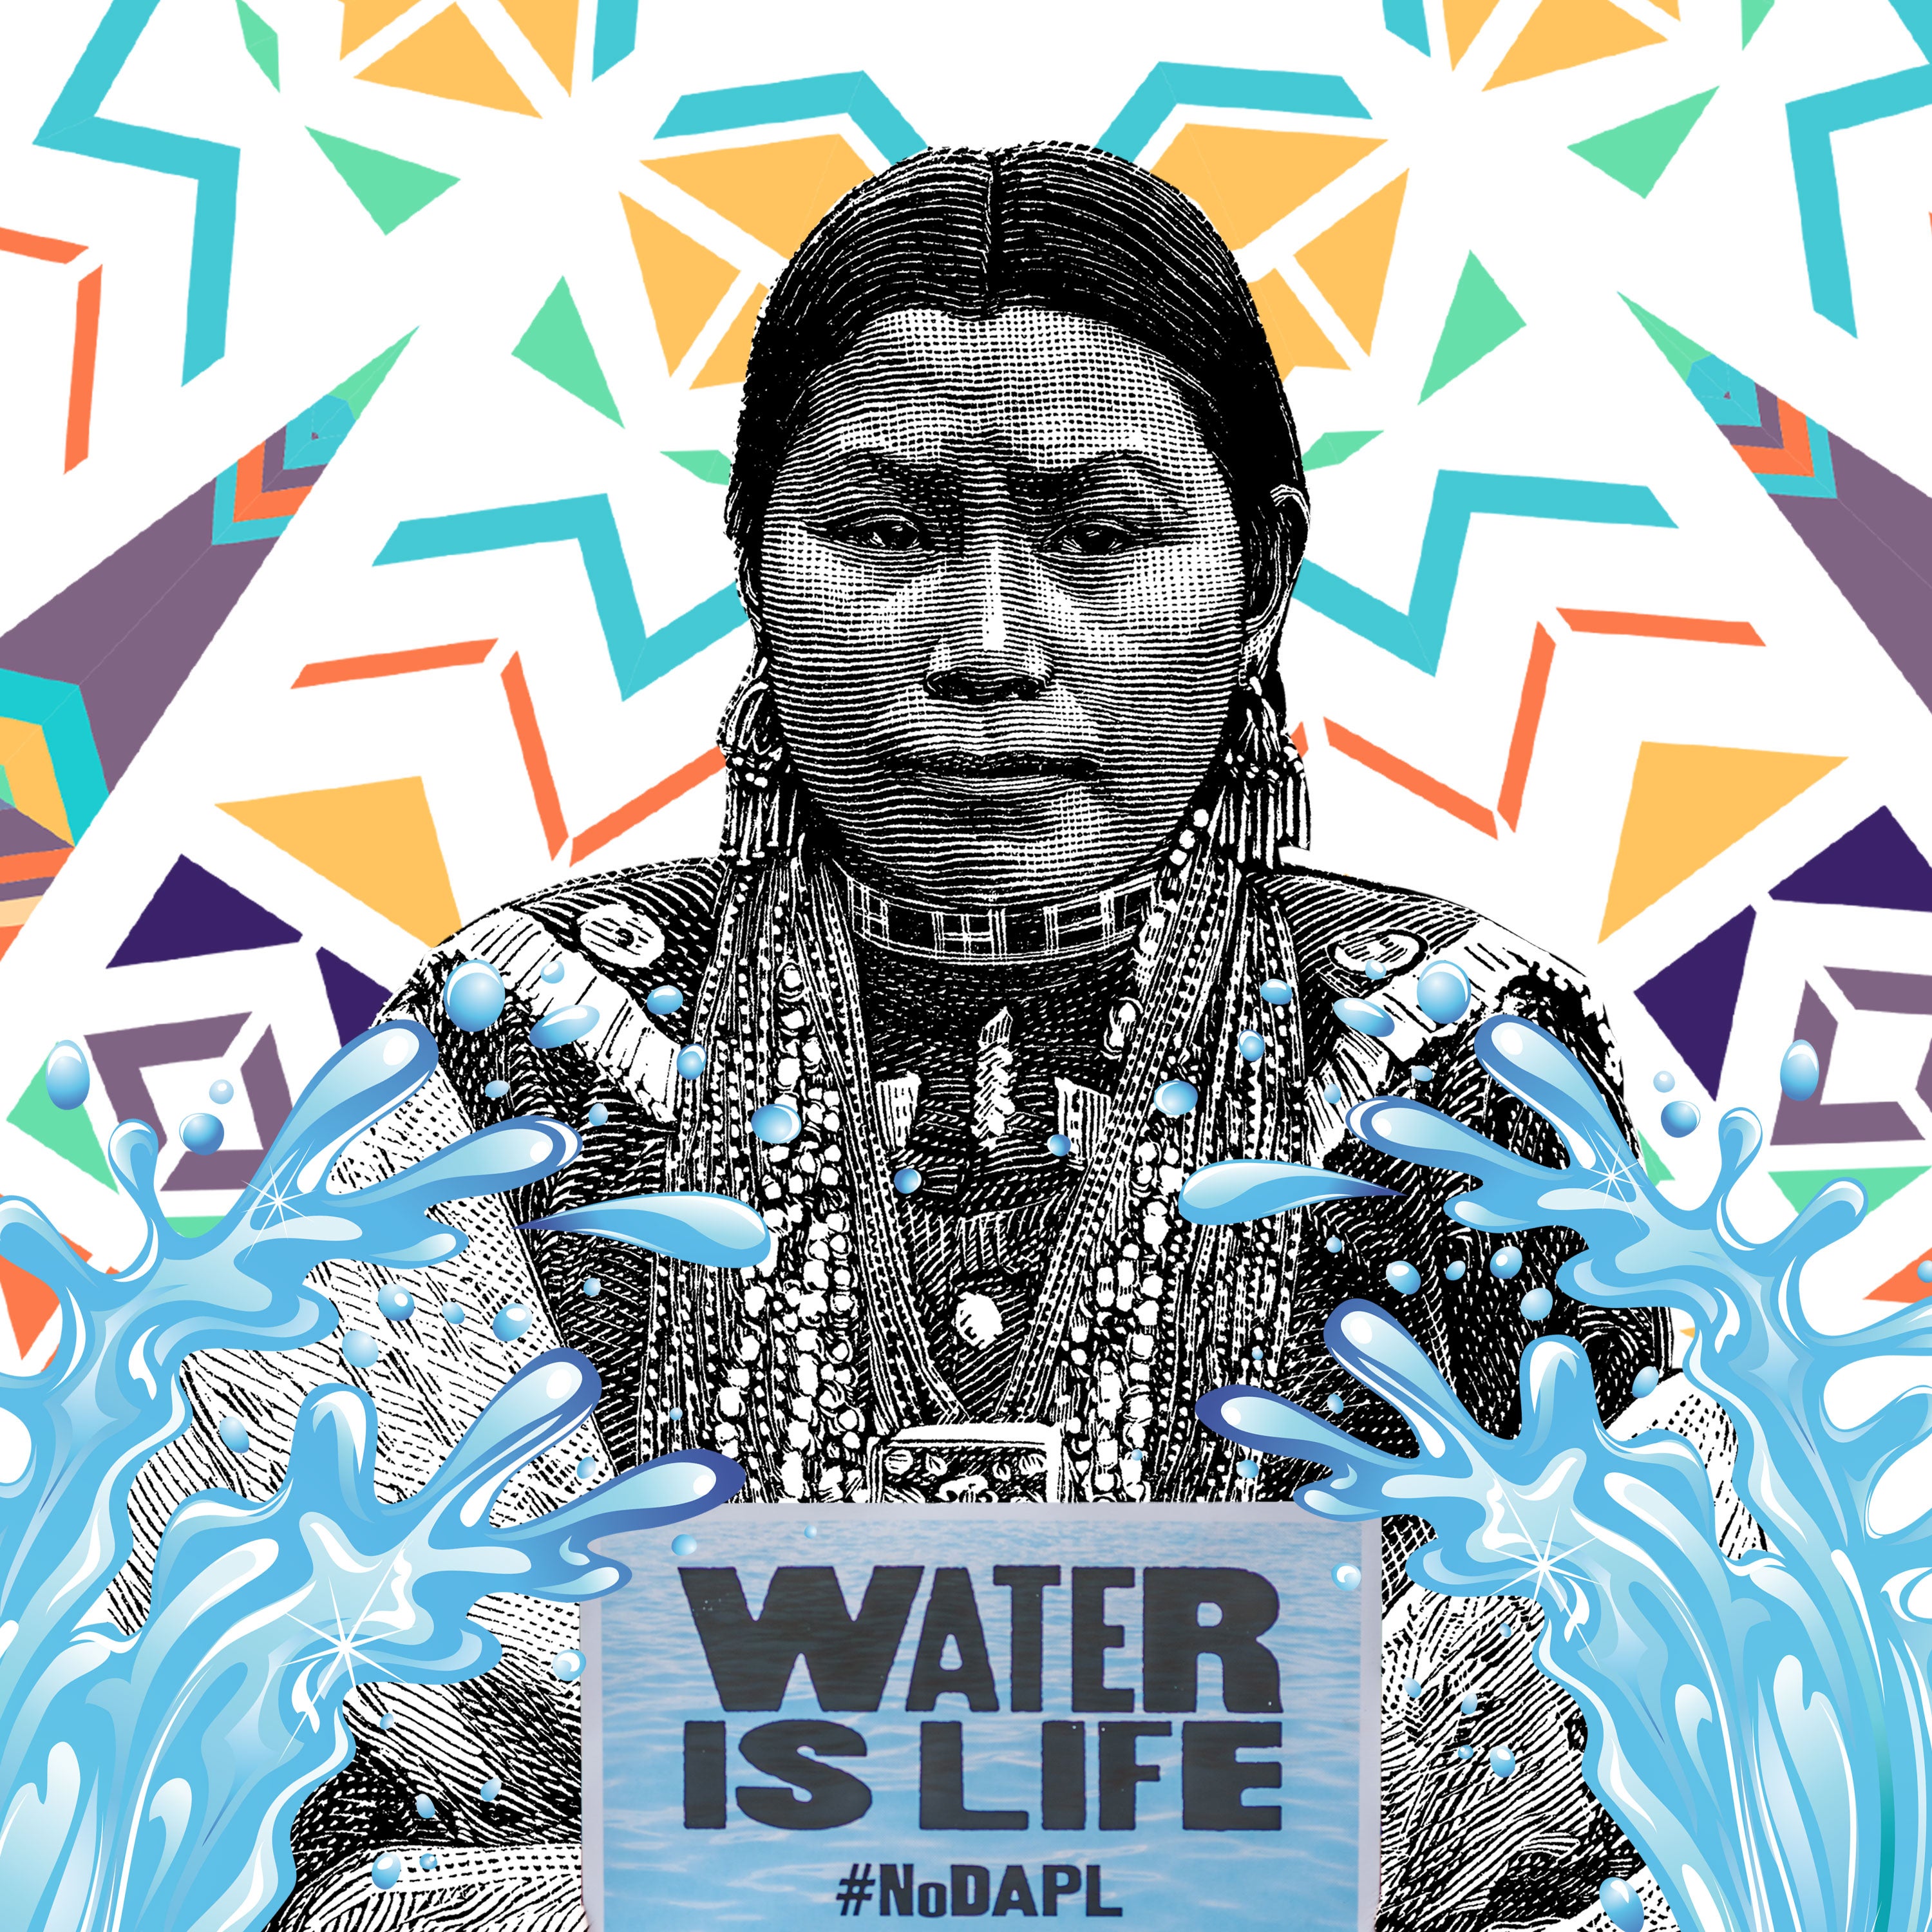 The War On Our Waters: A Letter To America From A Black And Native American Activist